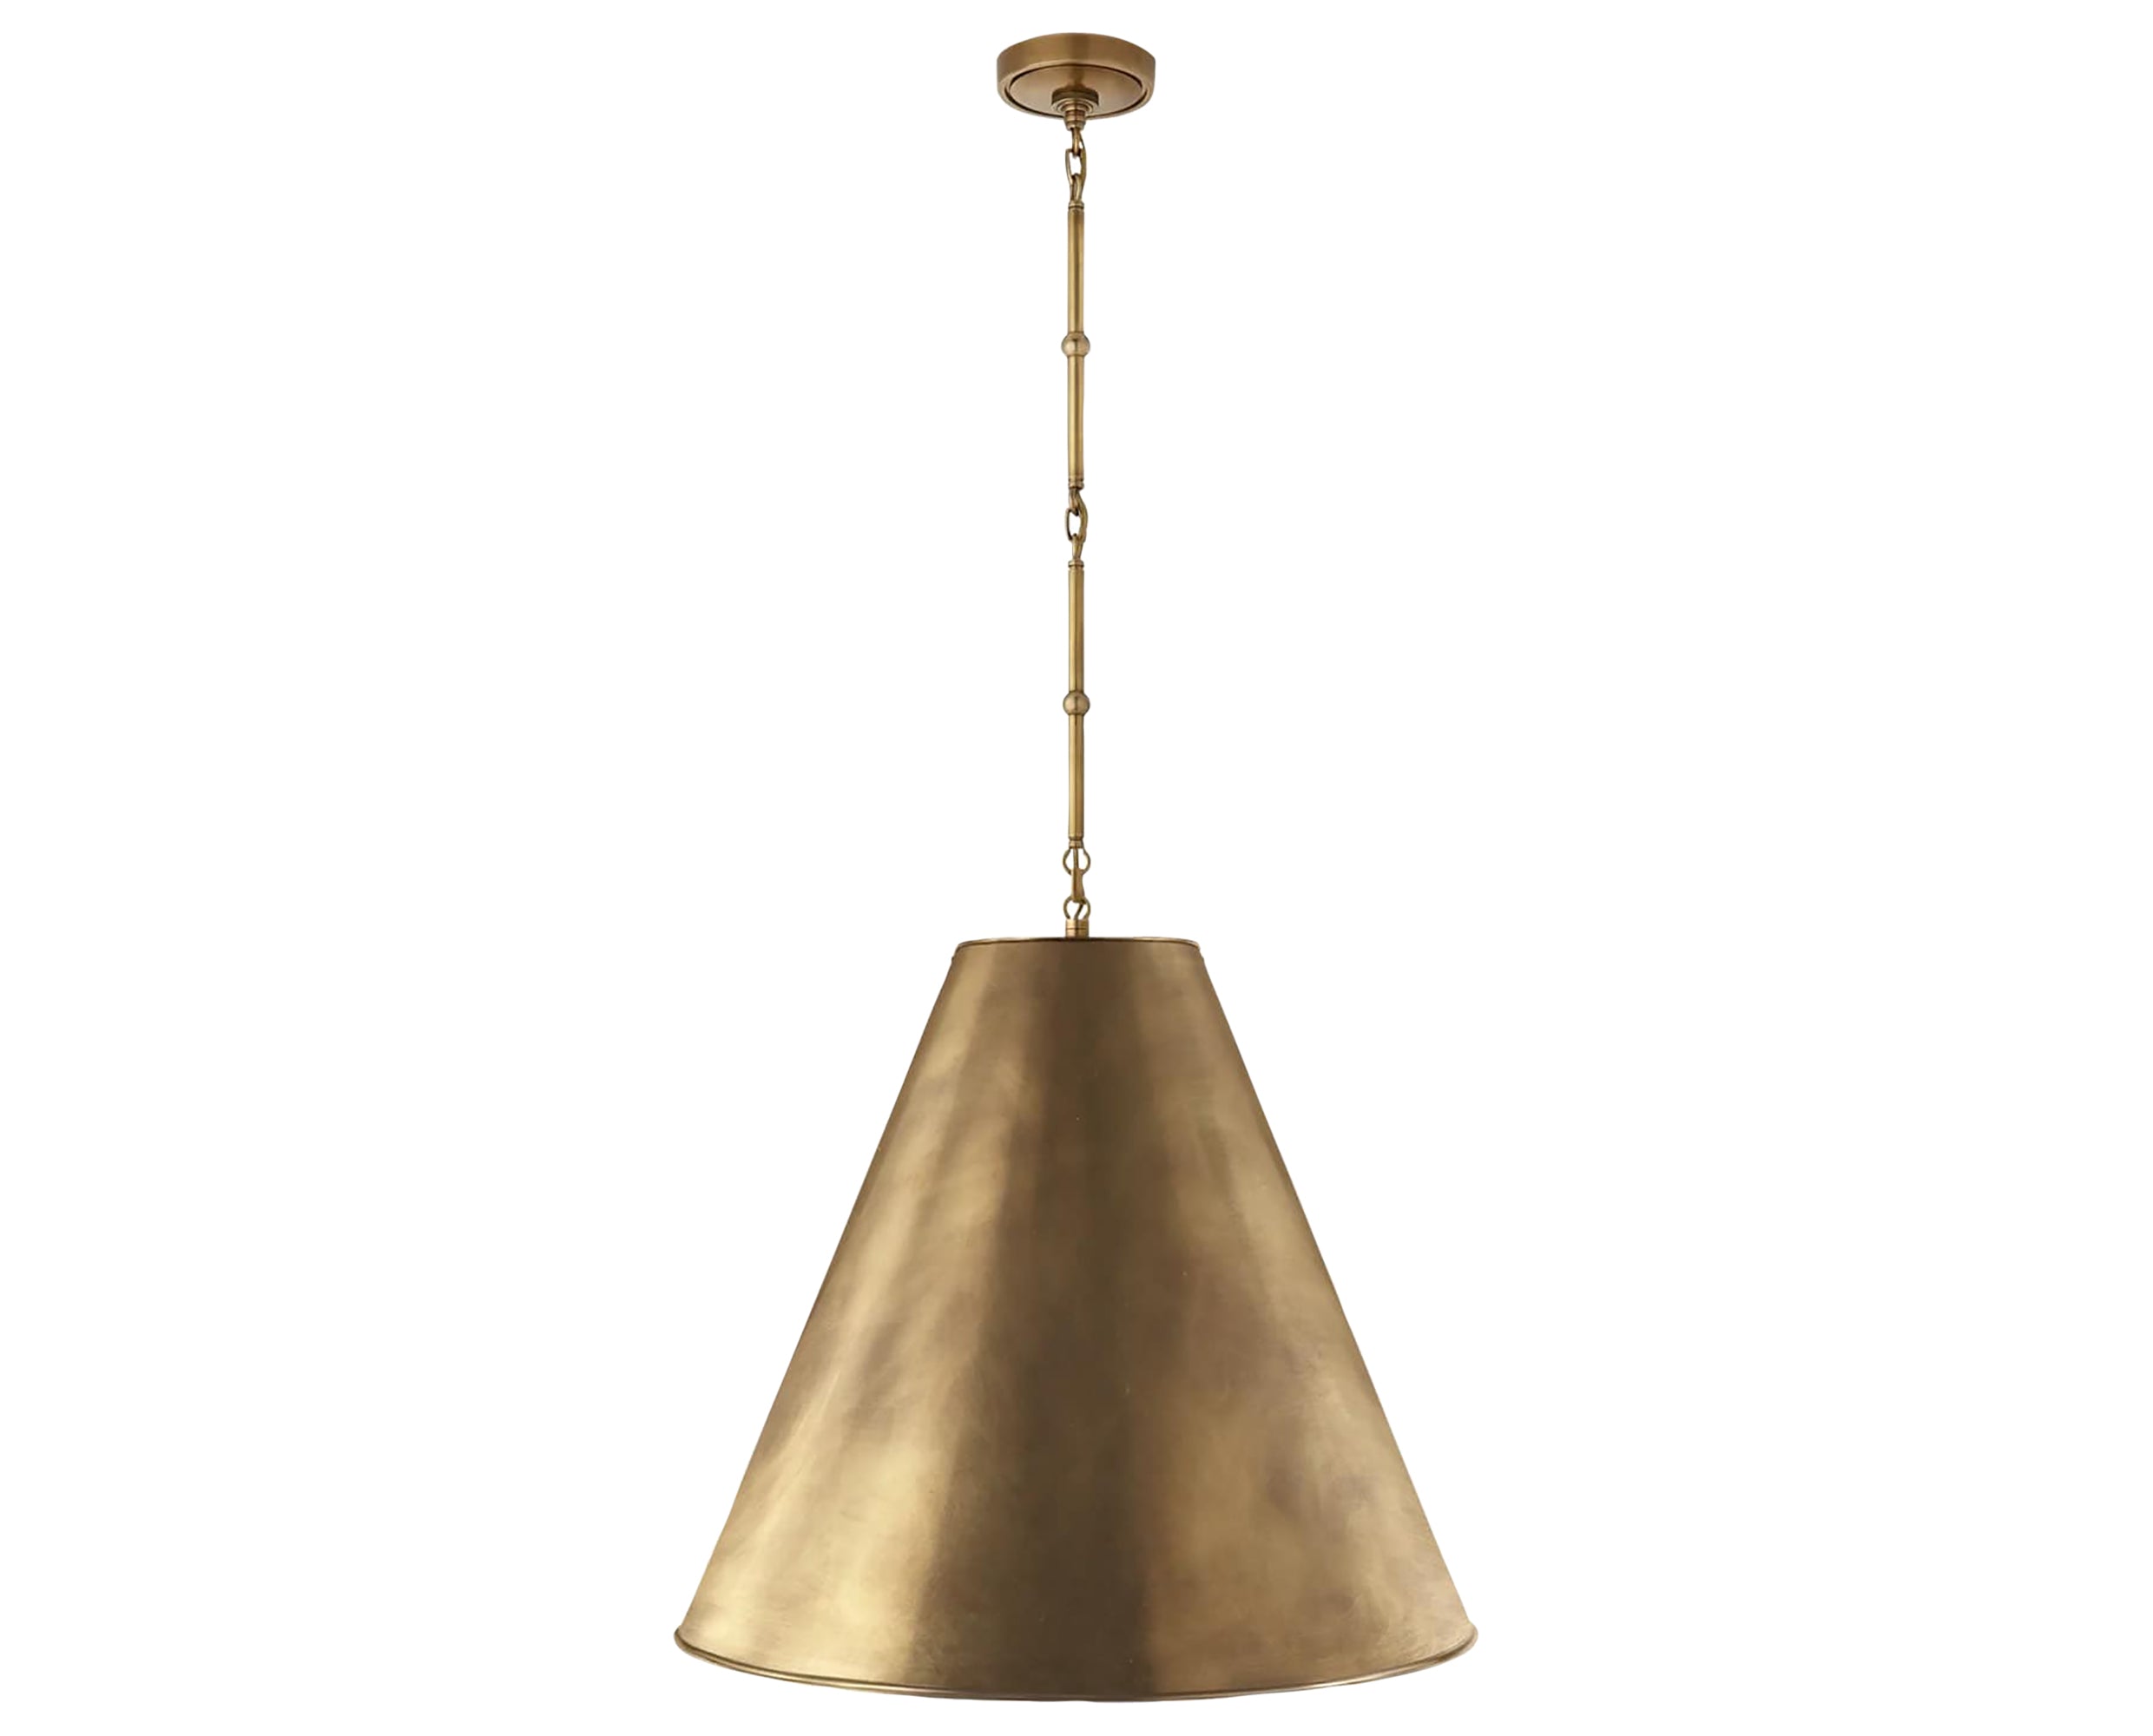 Hand-Rubbed Antique Brass and Hand-Rubbed Antique Brass | Goodman Large Hanging Lamp | Valley Ridge Furniture